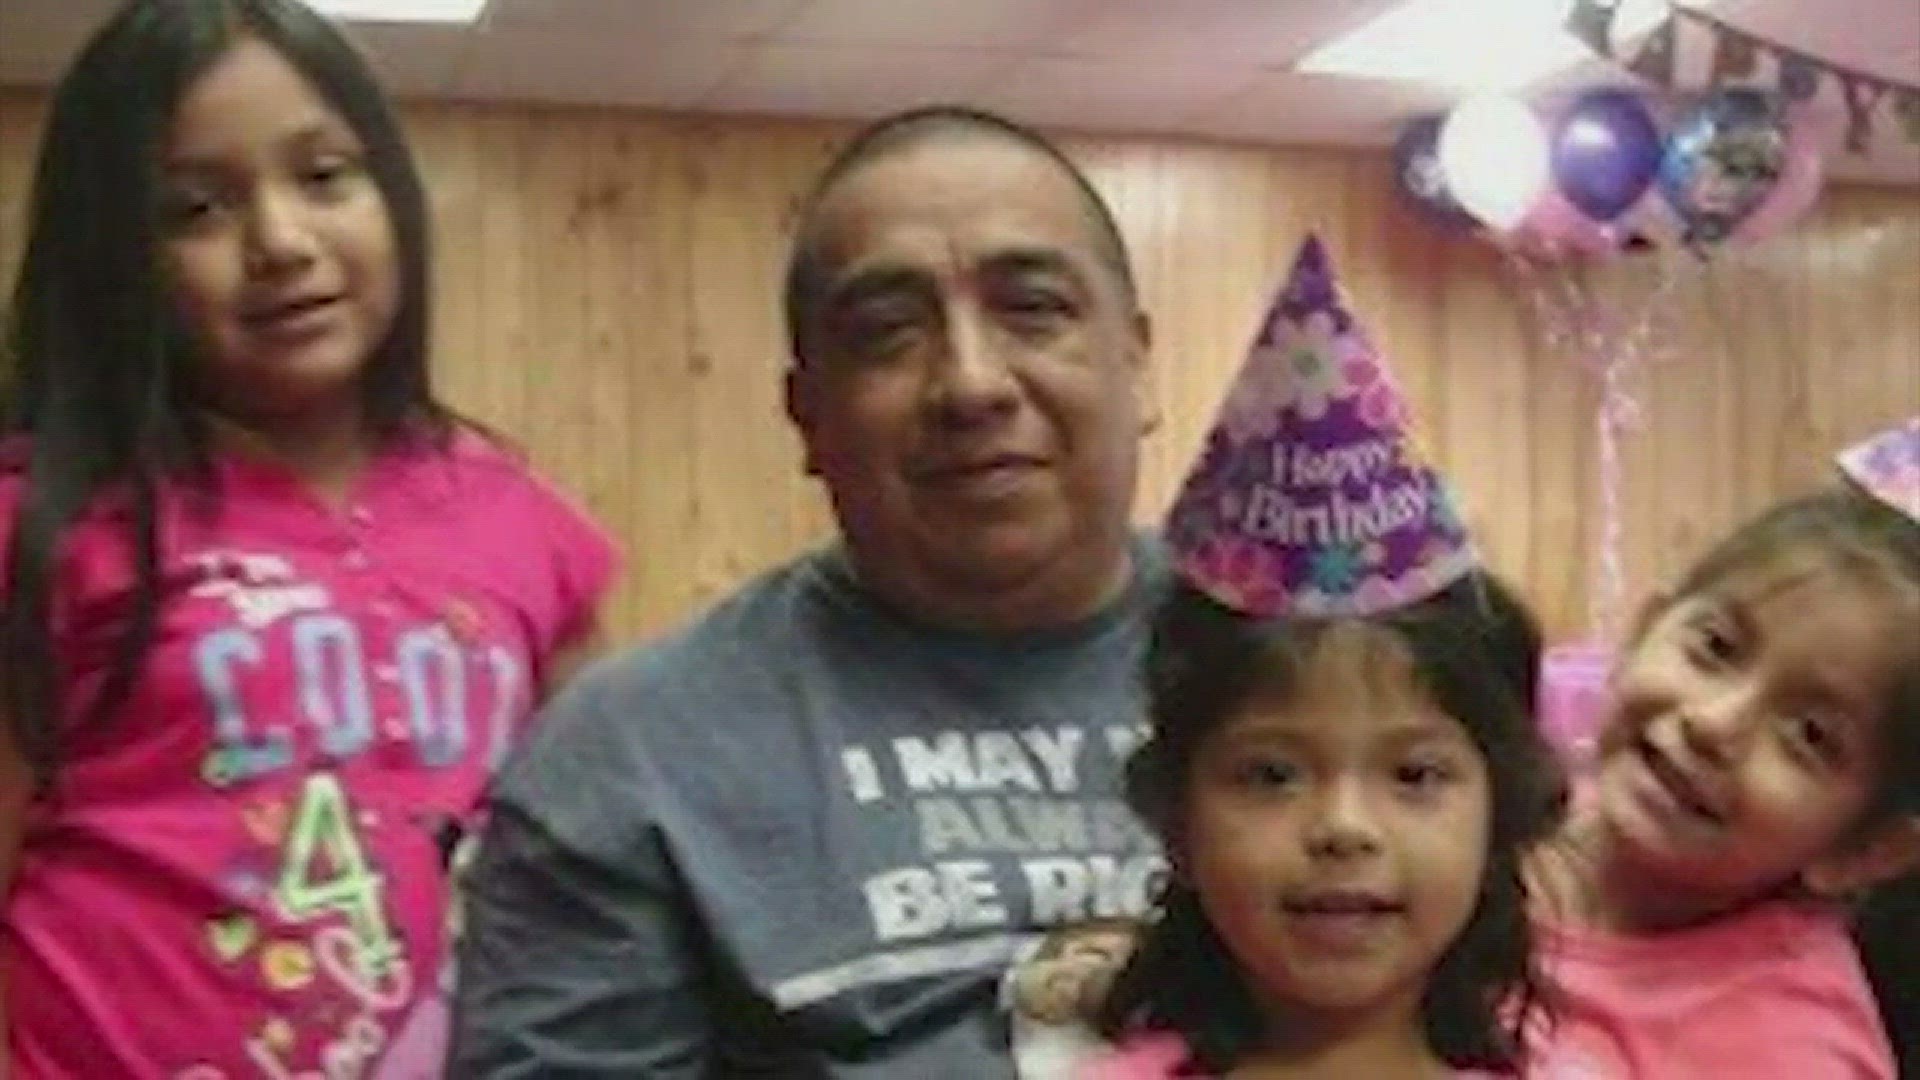 A family is pleading with federal immigration officials to release a local husband and father after they say he was wrongfully detained.